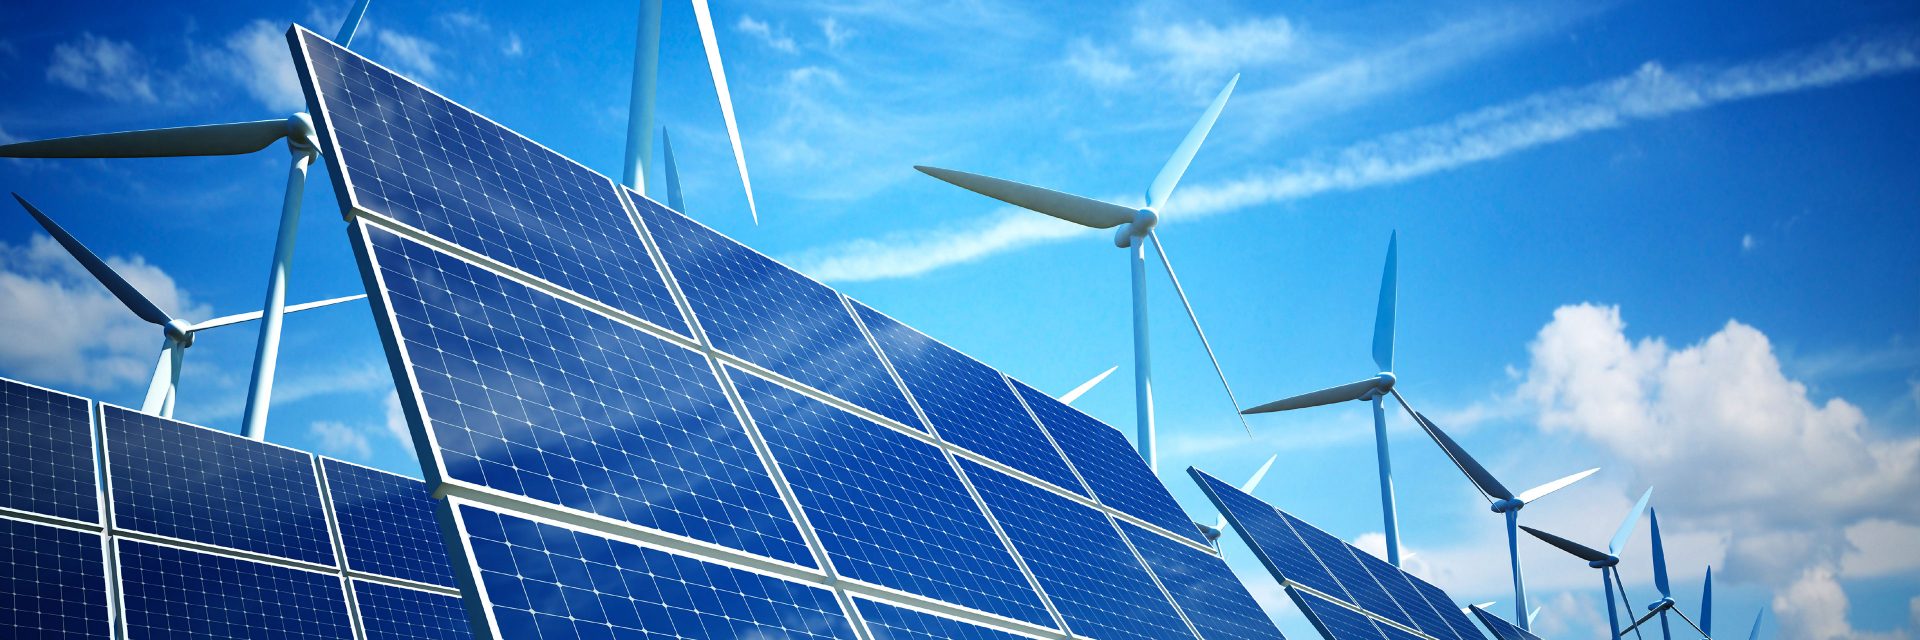 Sustainable site energy solutions: Ten things you can do now for big impact